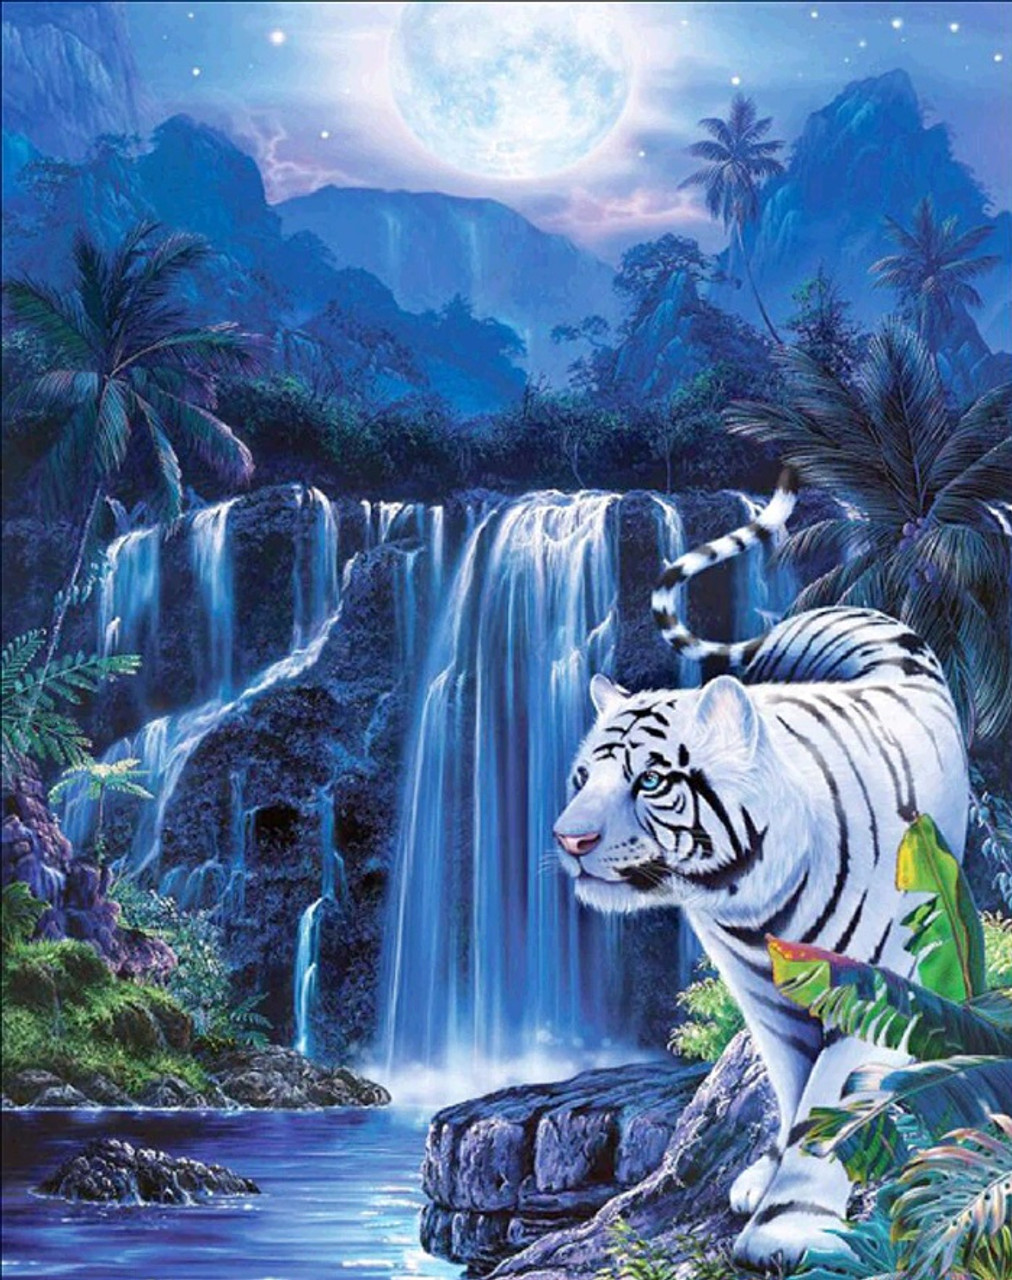 Moonlit White Tiger Family Paint with Diamonds - Goodnessfind